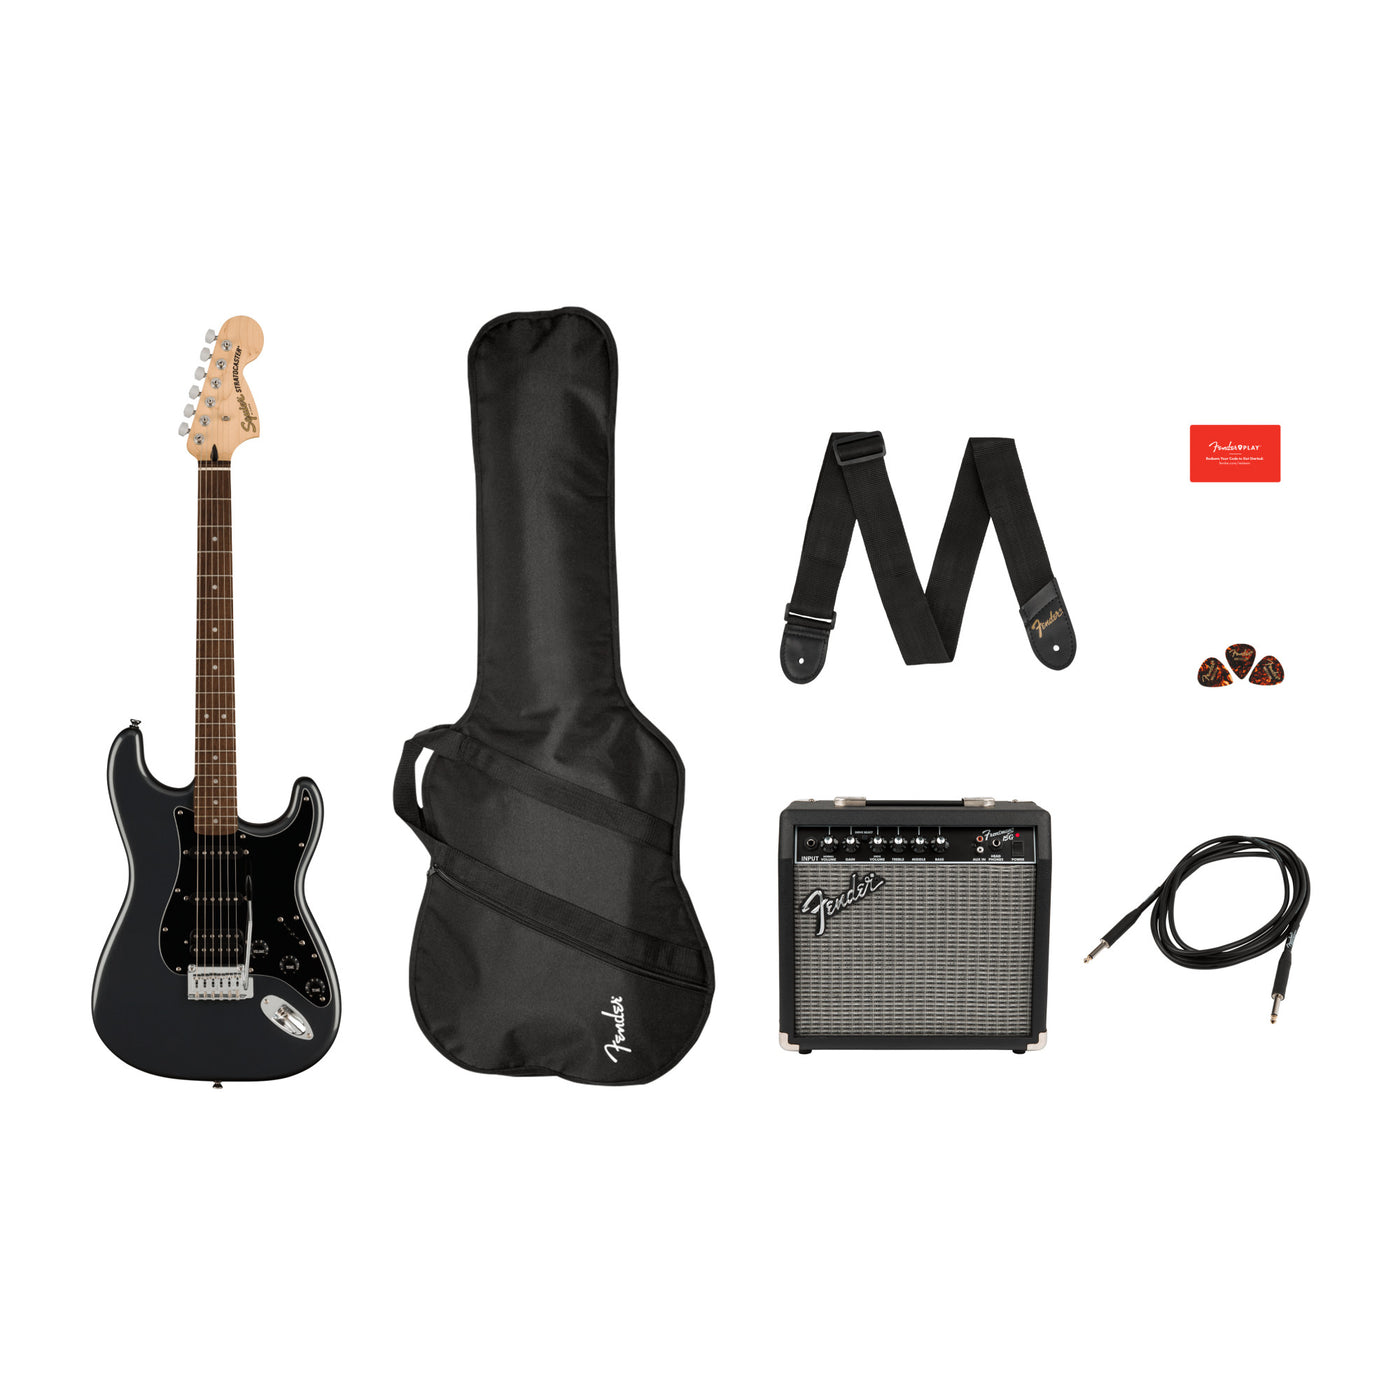 Squier Affinity Series Stratocaster HSS Pack, Charcoal Frost Metallic  (0372821069)